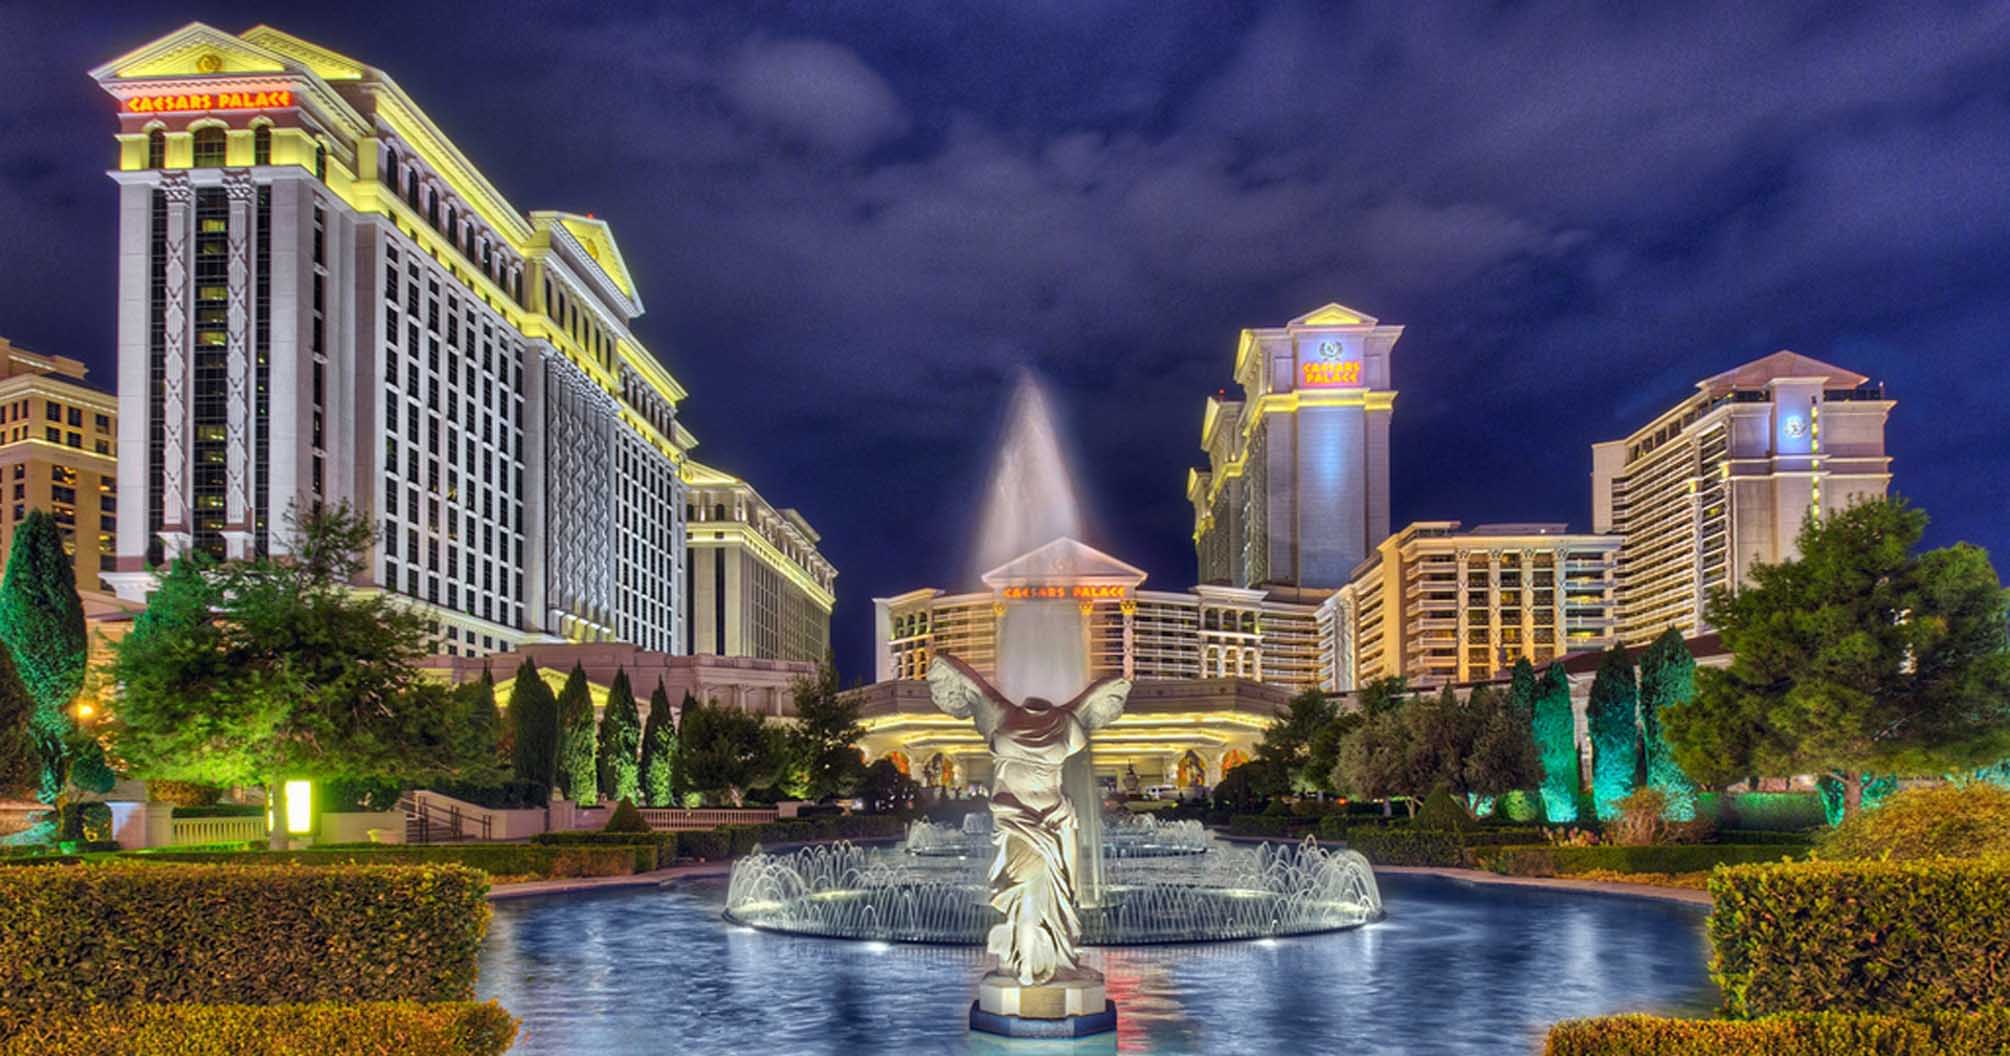 Caesars Palace Las Vegas Hotels - one of the biggest luxury resorts on the Strip